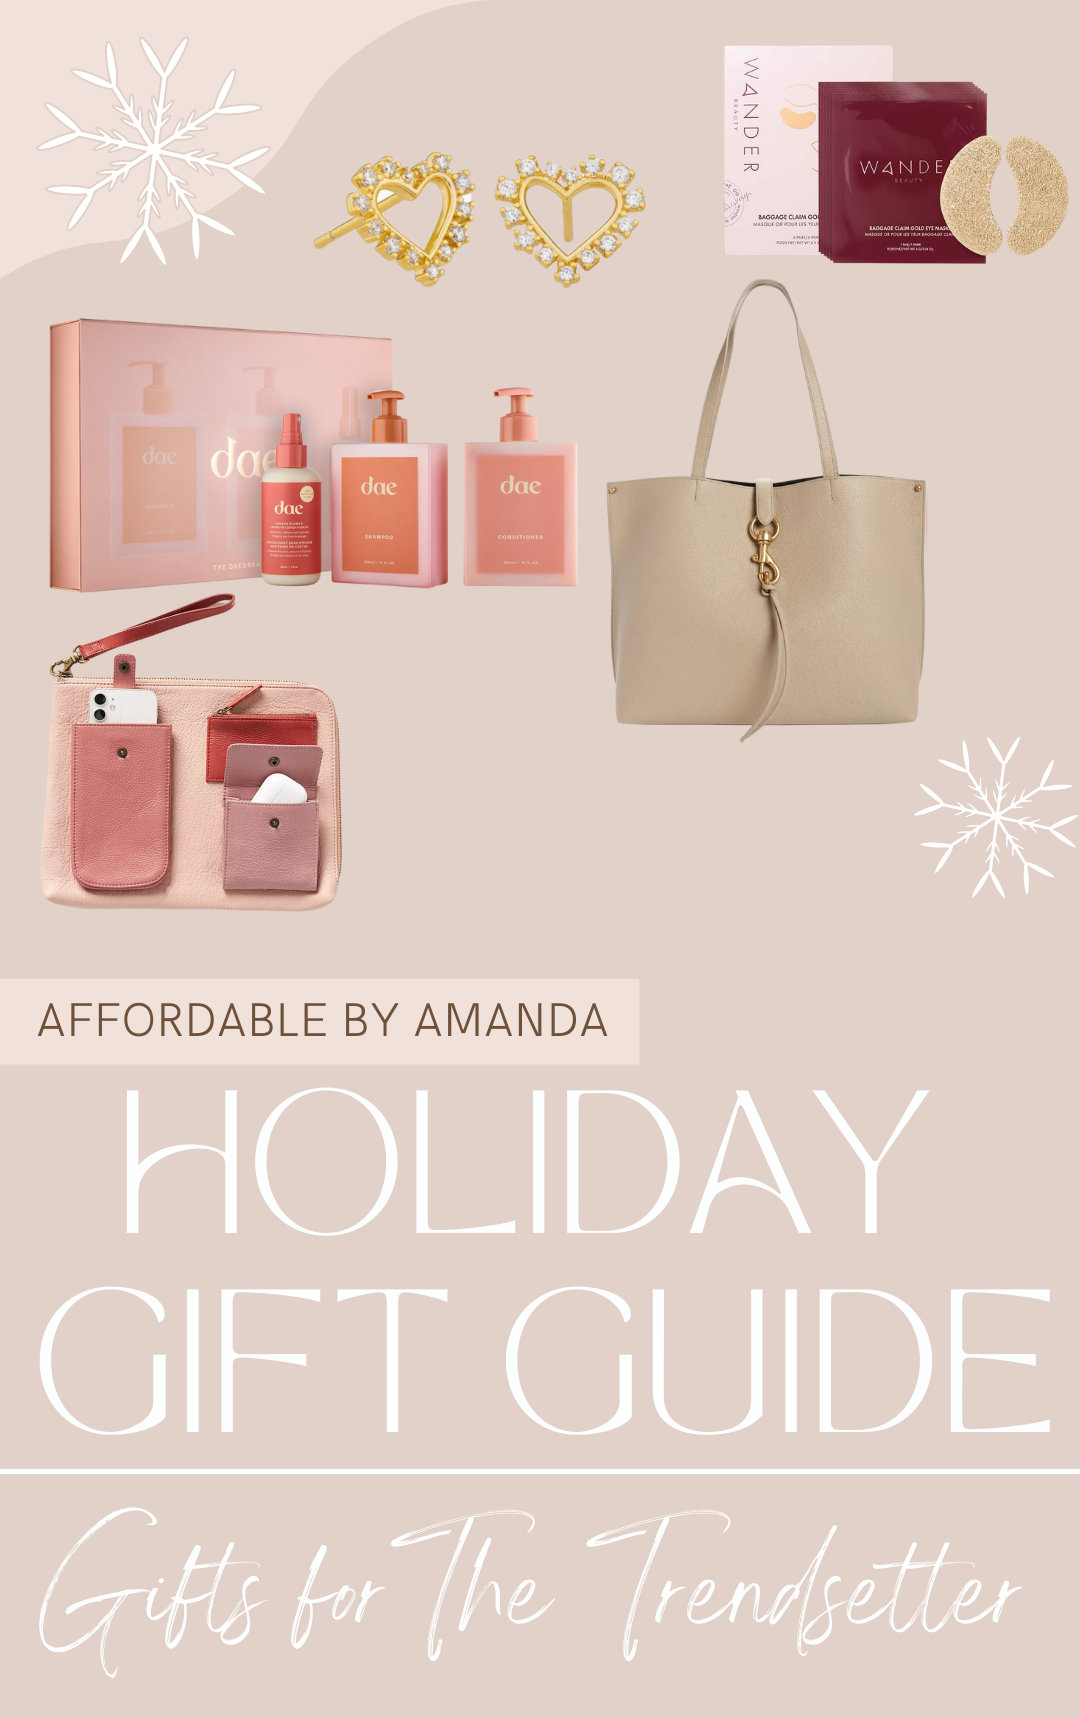 Holiday Gift Guide 2021 - Gift Ideas for the Trendsetter - Affordable by Amanda